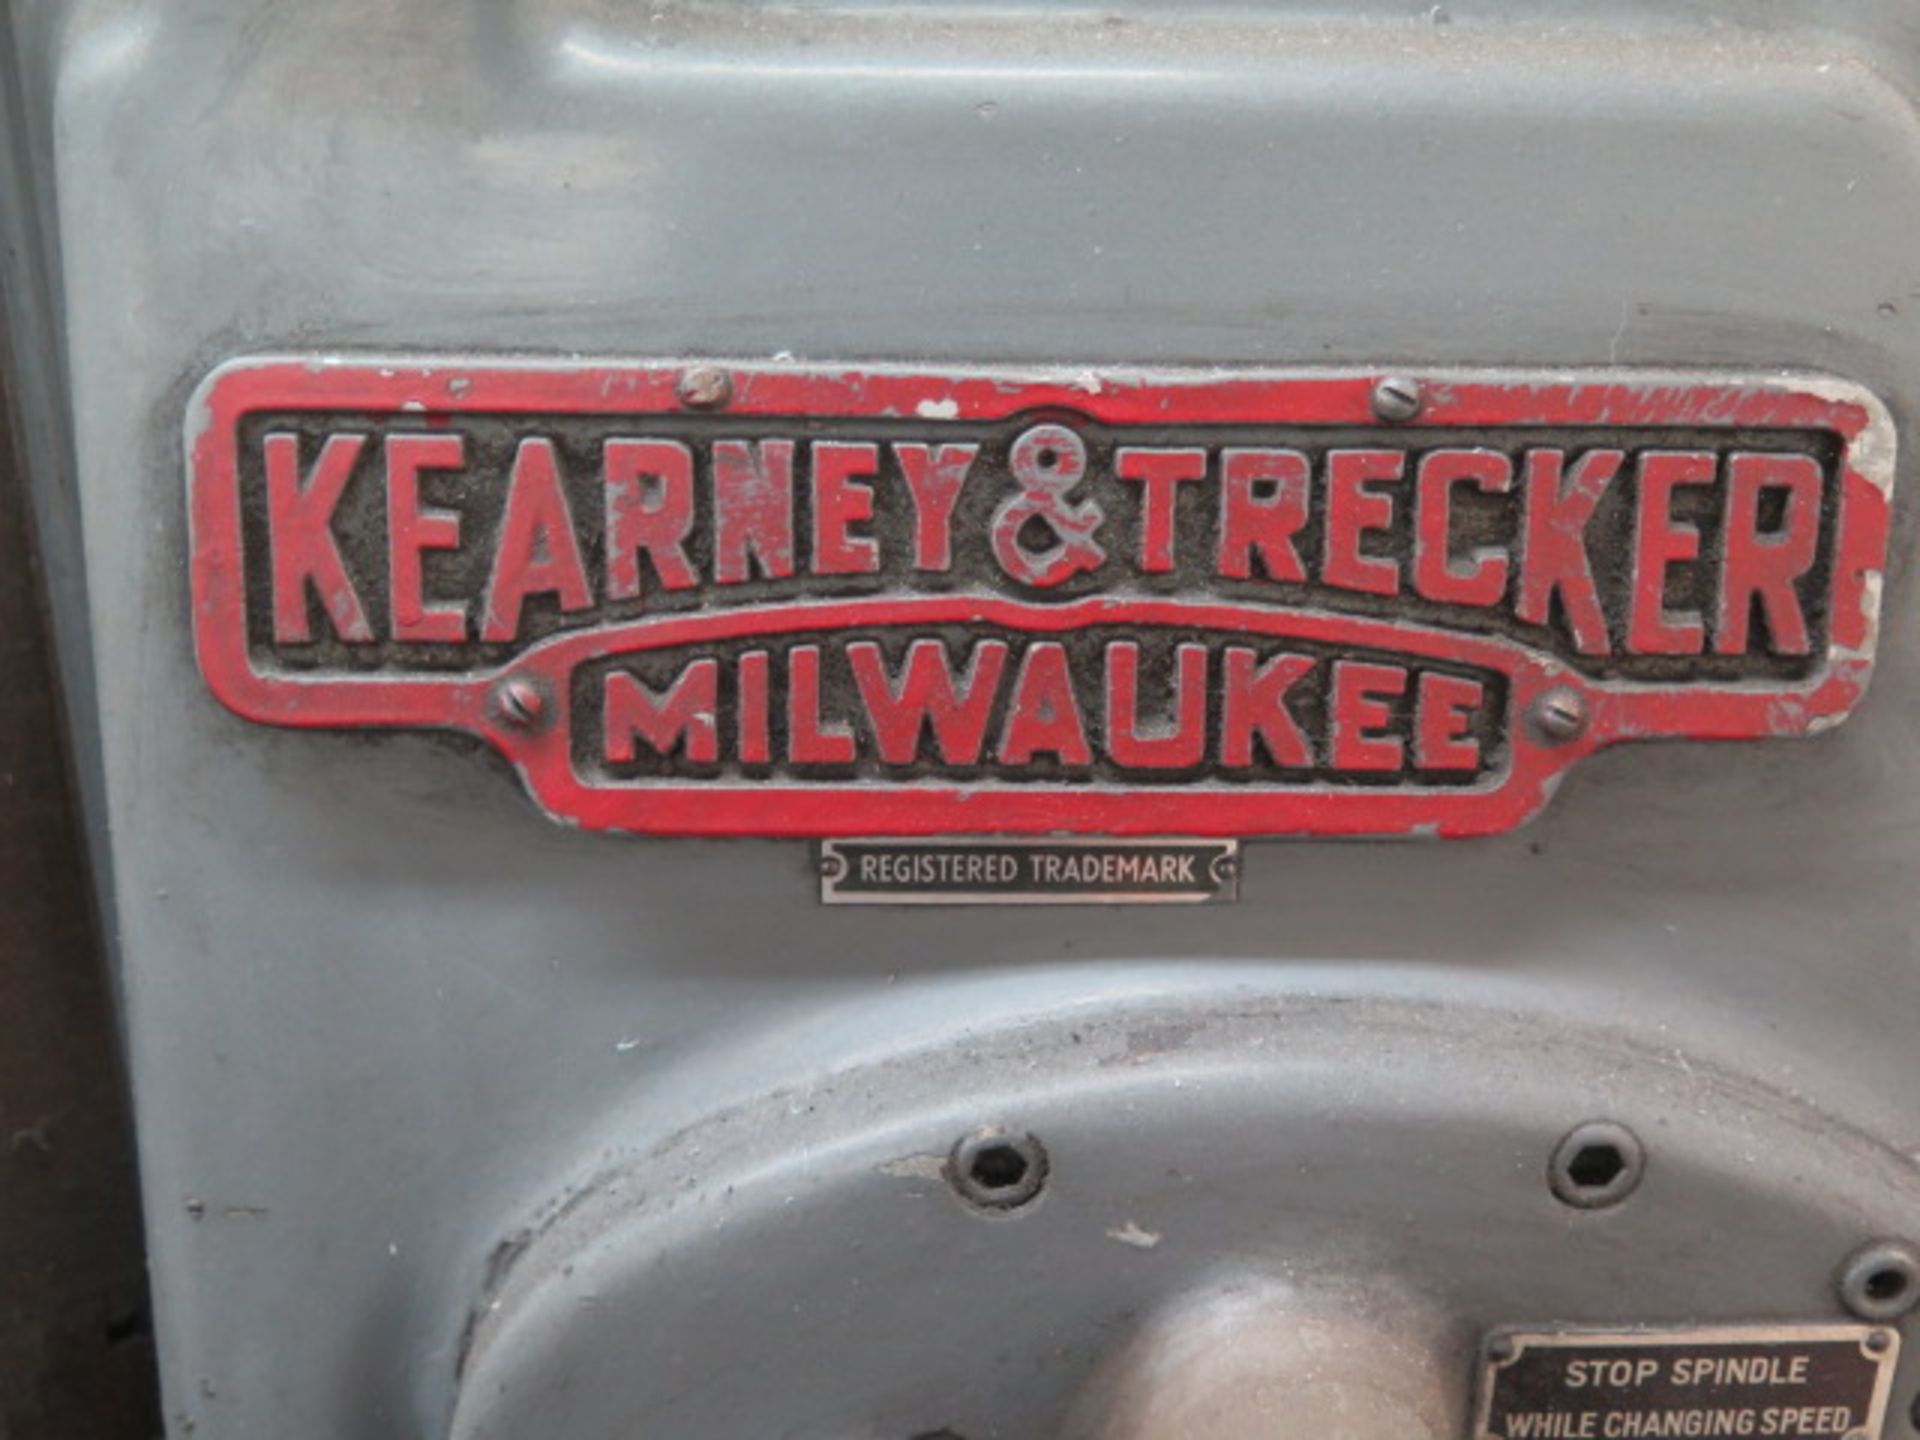 Kearney & Trecker Milwaukee 3HP-No2 mdl. CE Universal Horizontal Mill w/ 25-1300 RPM, SOLD AS IS - Image 5 of 15